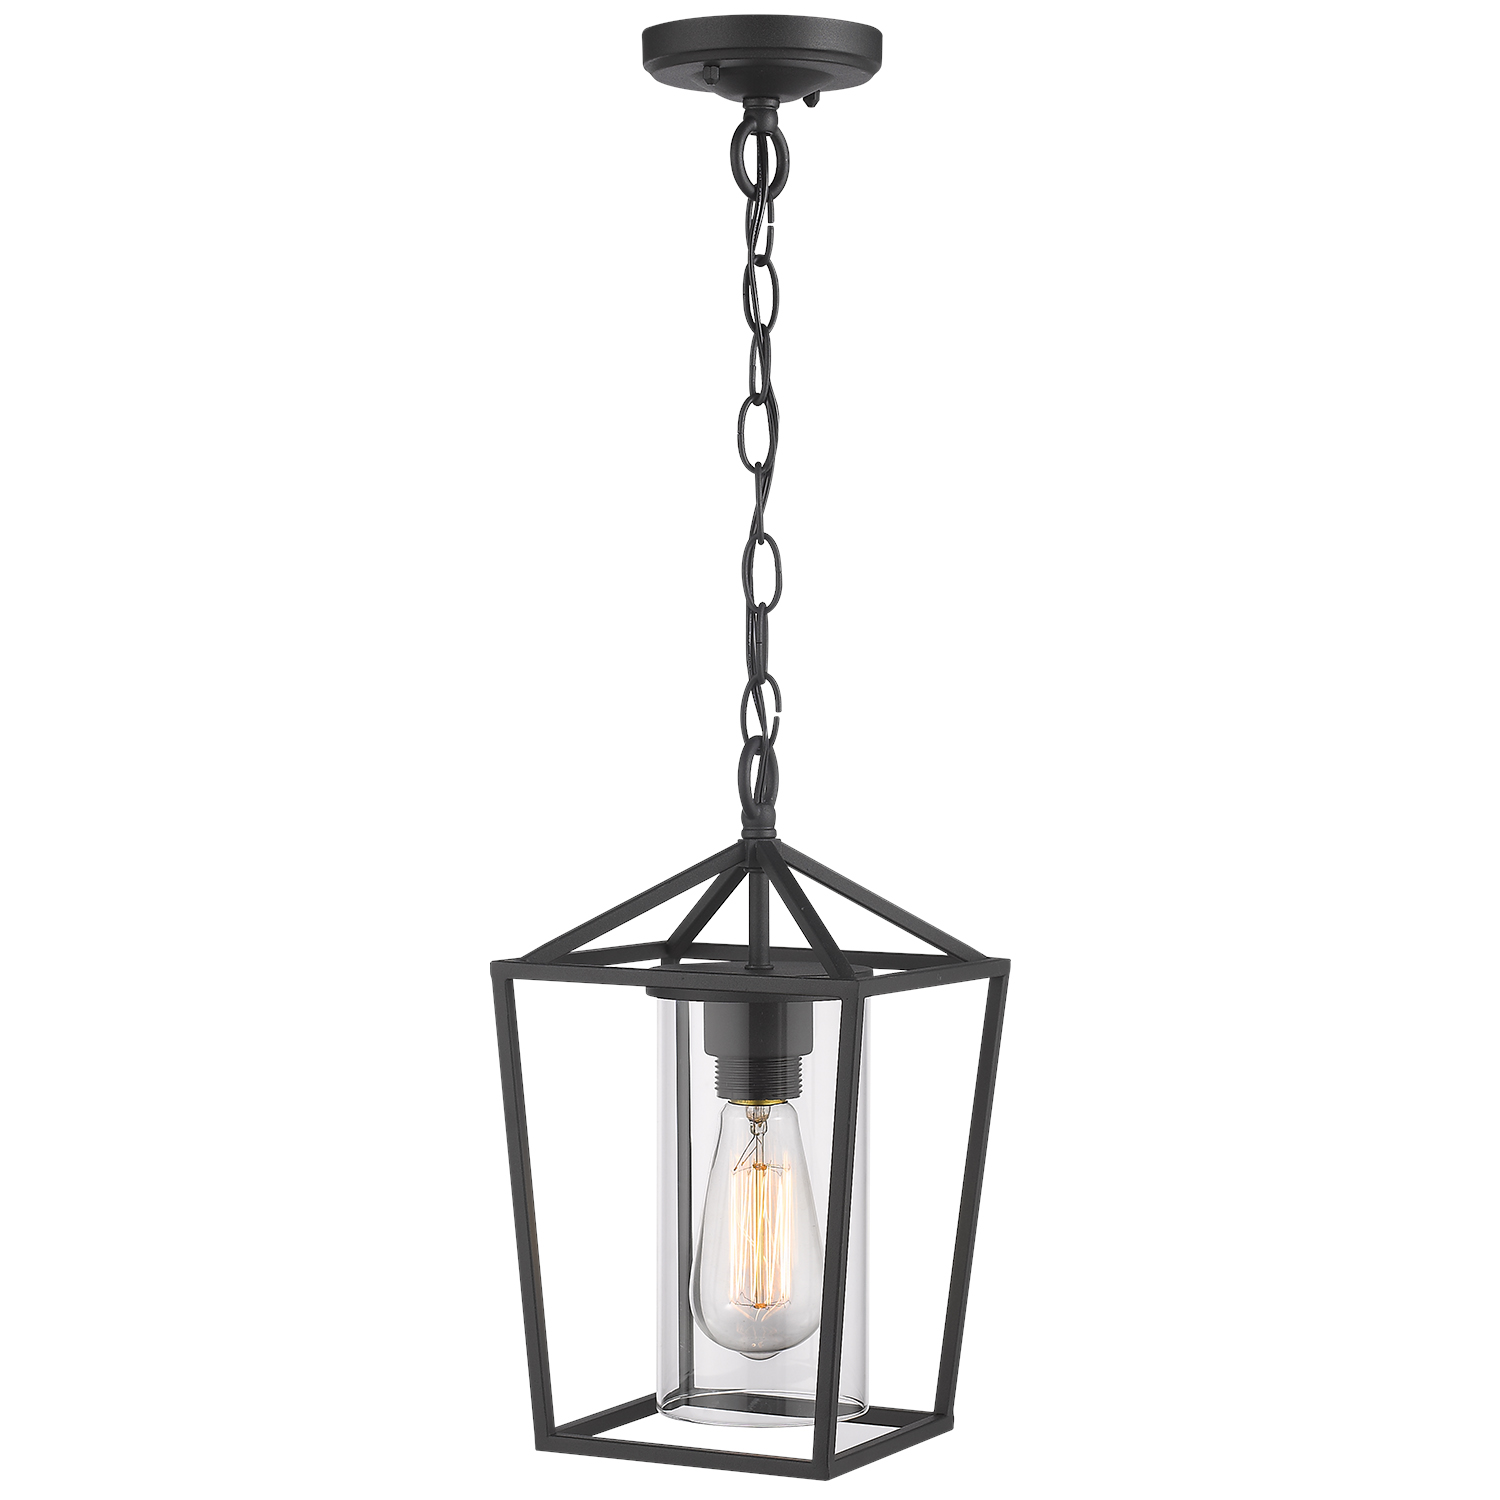 Black Modern Outdoor Pendant Light Caged 1-Light Outdoor Hanging Lantern Light Balck Finish with Cylinder Clear Glass Outdoor Weather Resistant Pendant Light for Wet Location - image 1 of 10